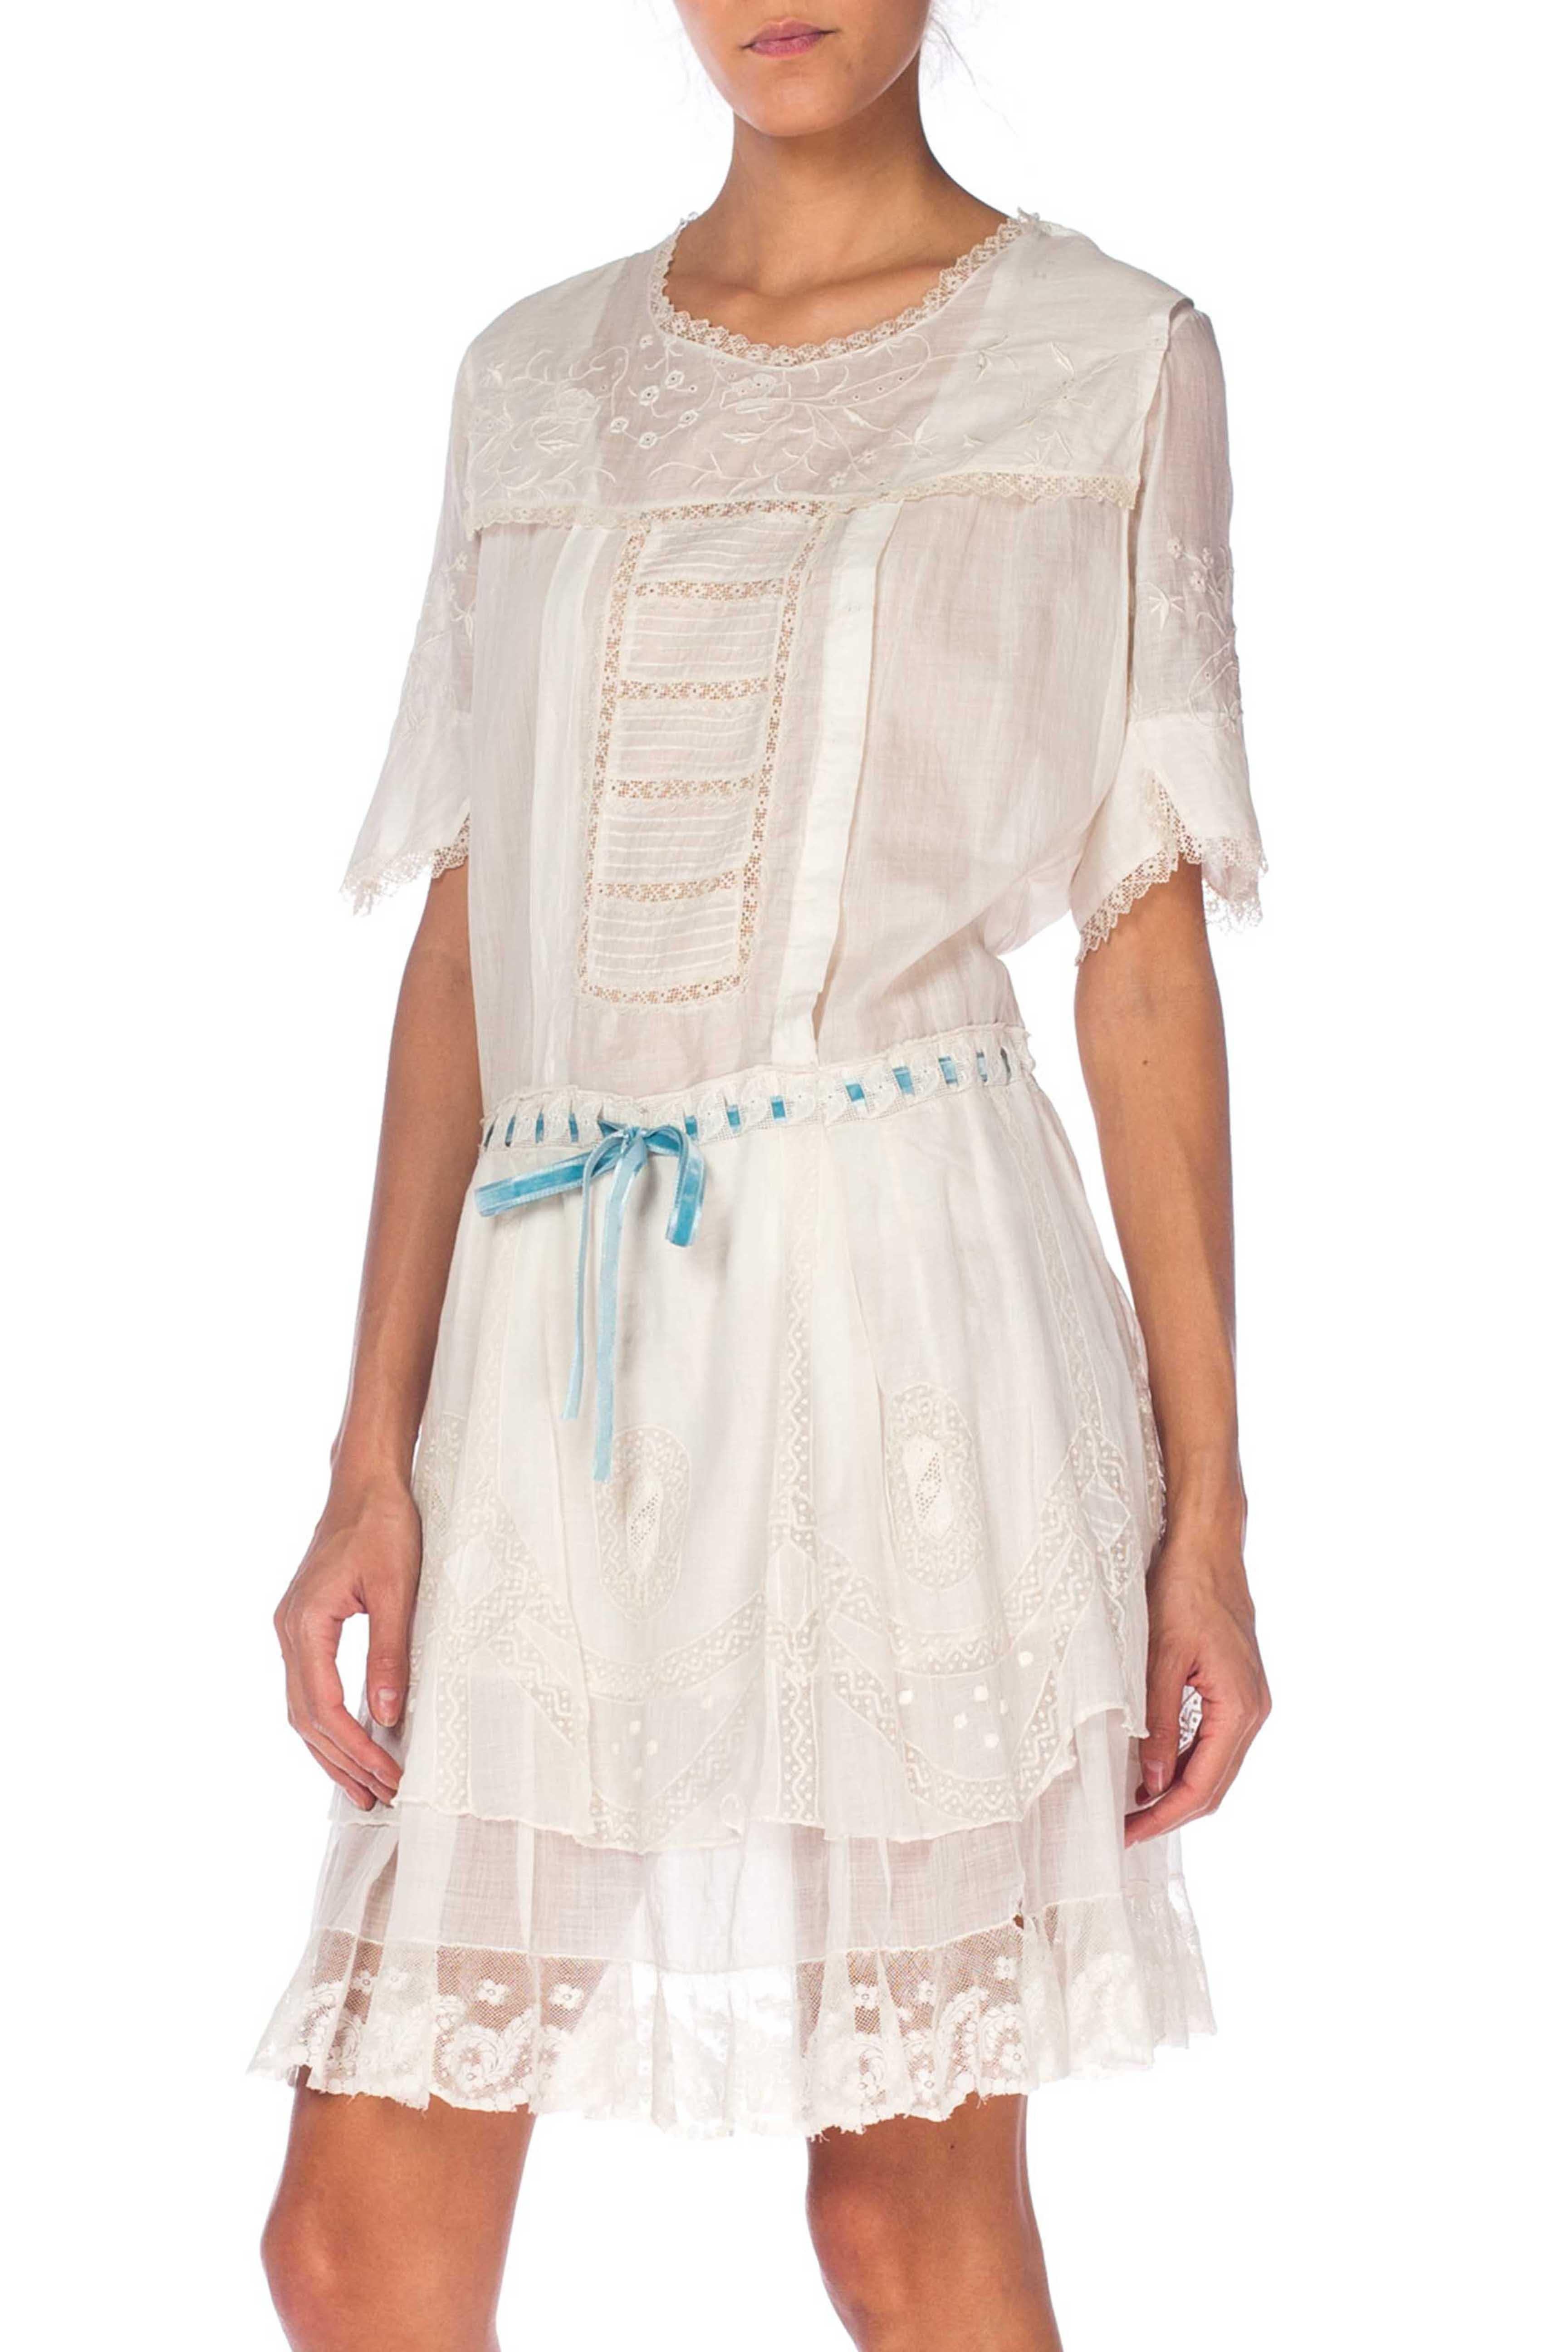 Edwardian White Hand Embroidered Organic Cotton Voile Young Girls Dress With La In Excellent Condition For Sale In New York, NY